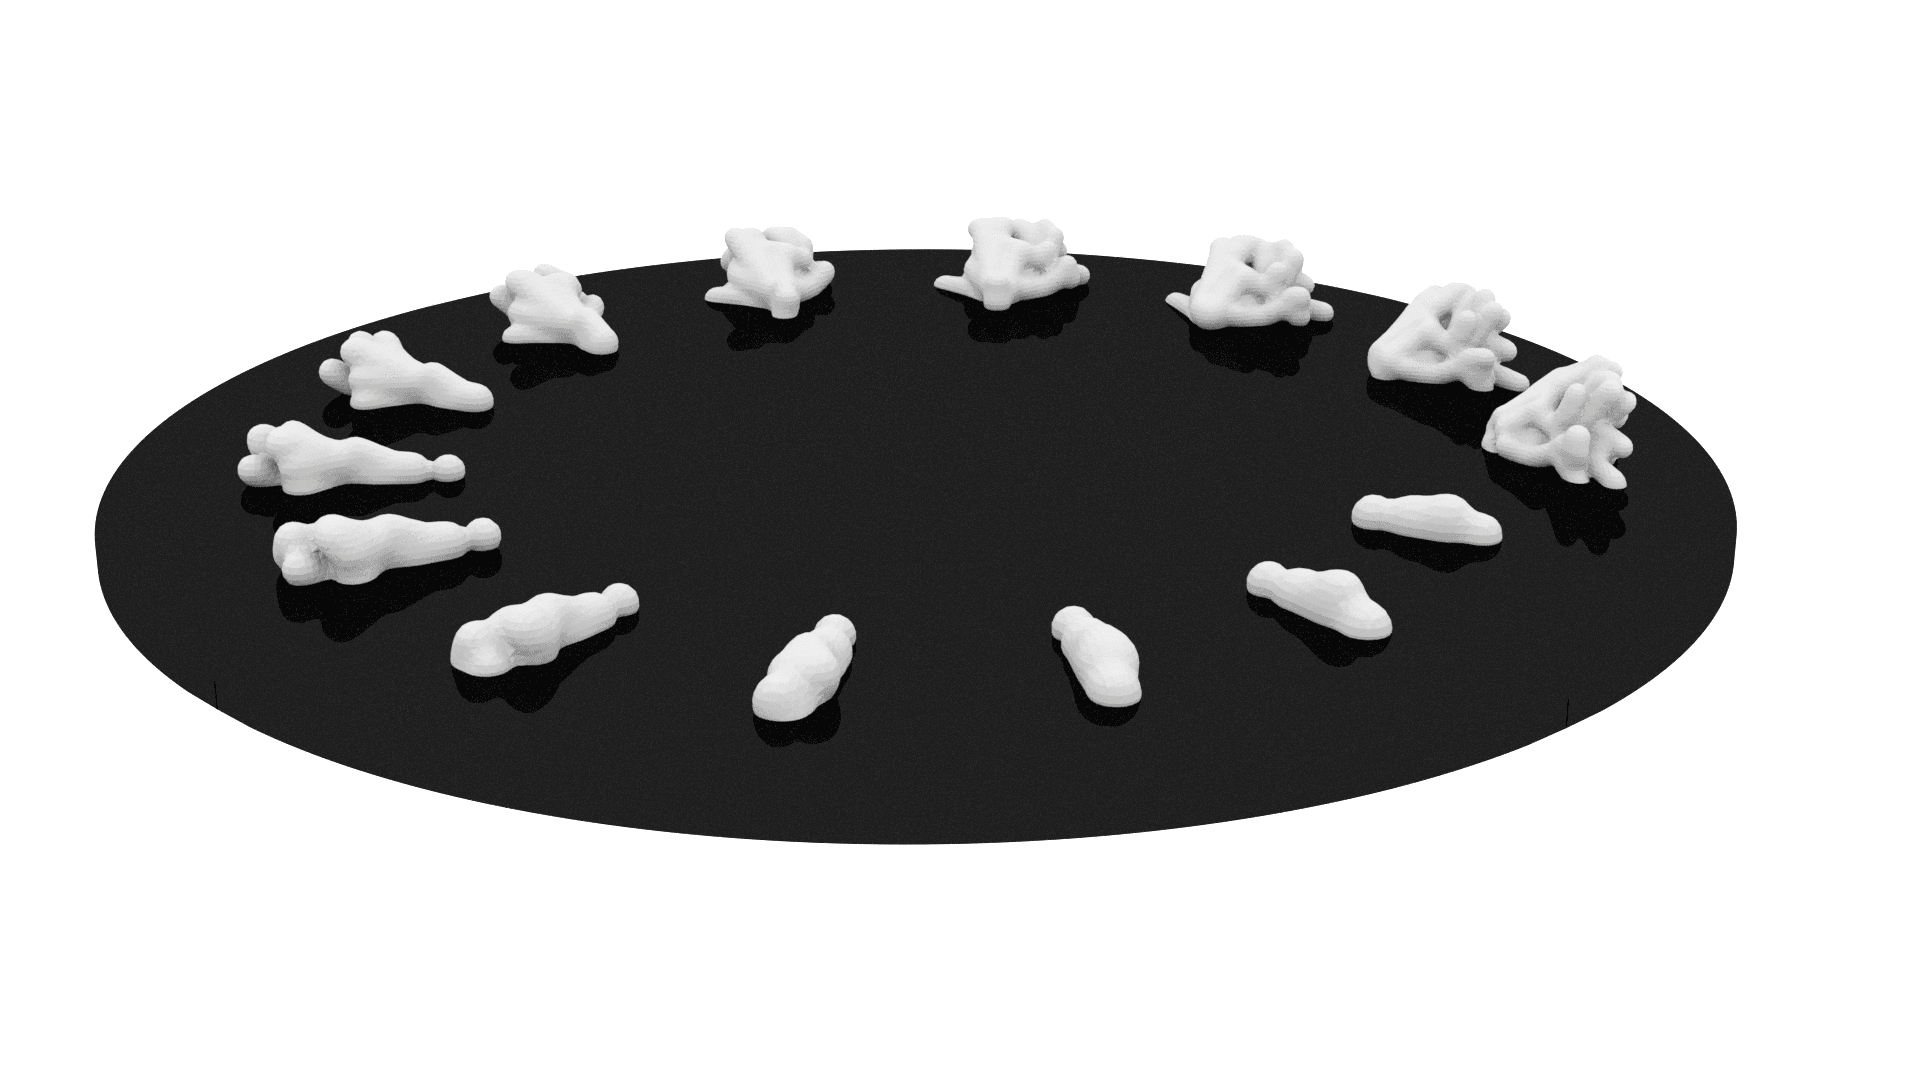 Zoetrope of generated 3D forms